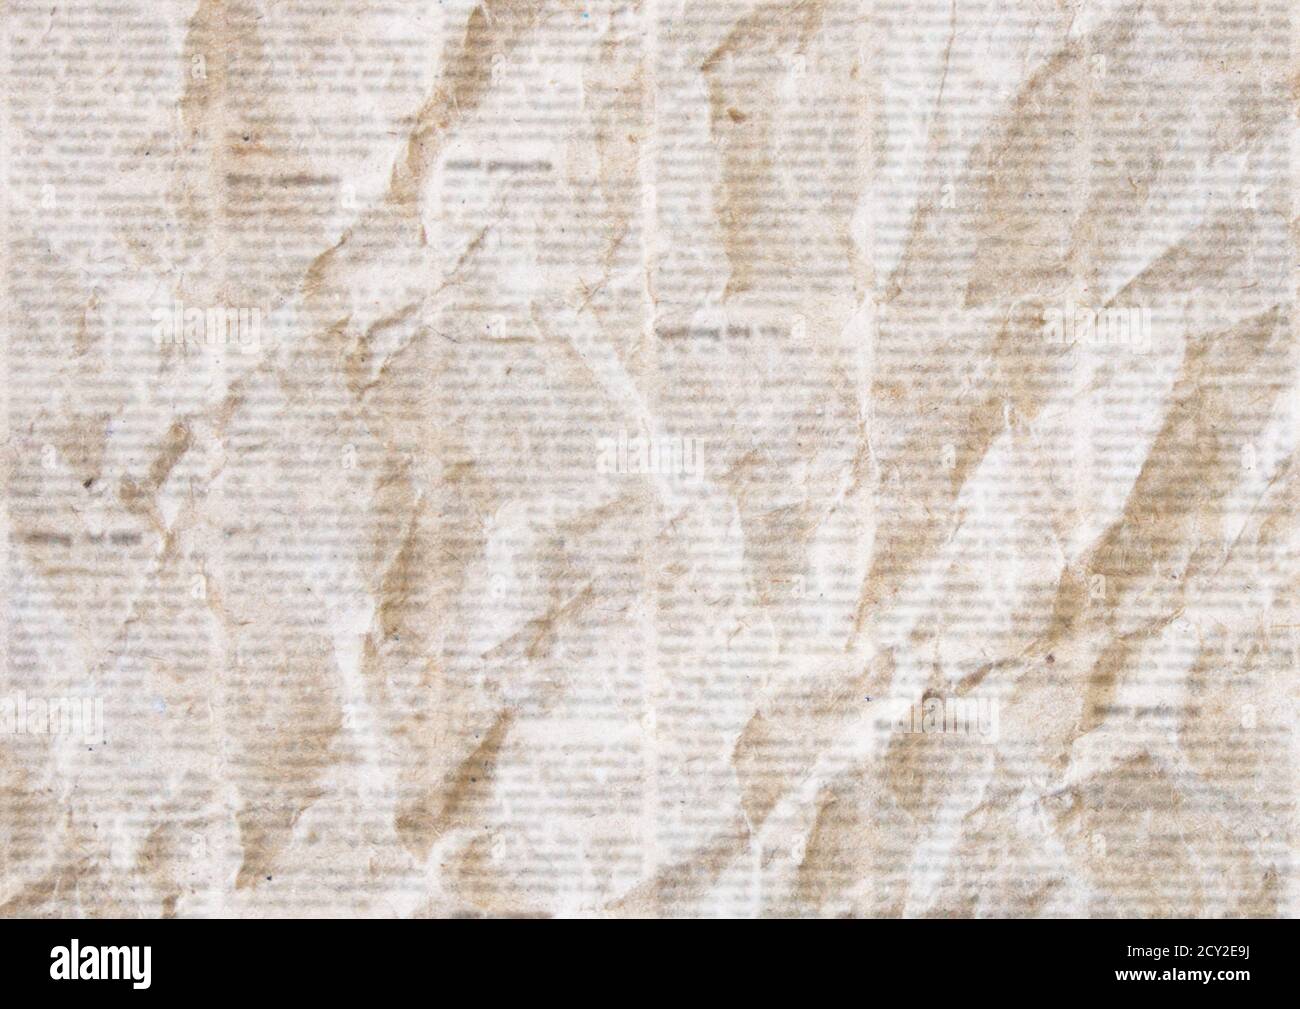 Old crumpled grunge newspaper paper texture background. Blurred vintage newspaper background. Crumpled paper textured page. Sepia color collage news p Stock Photo